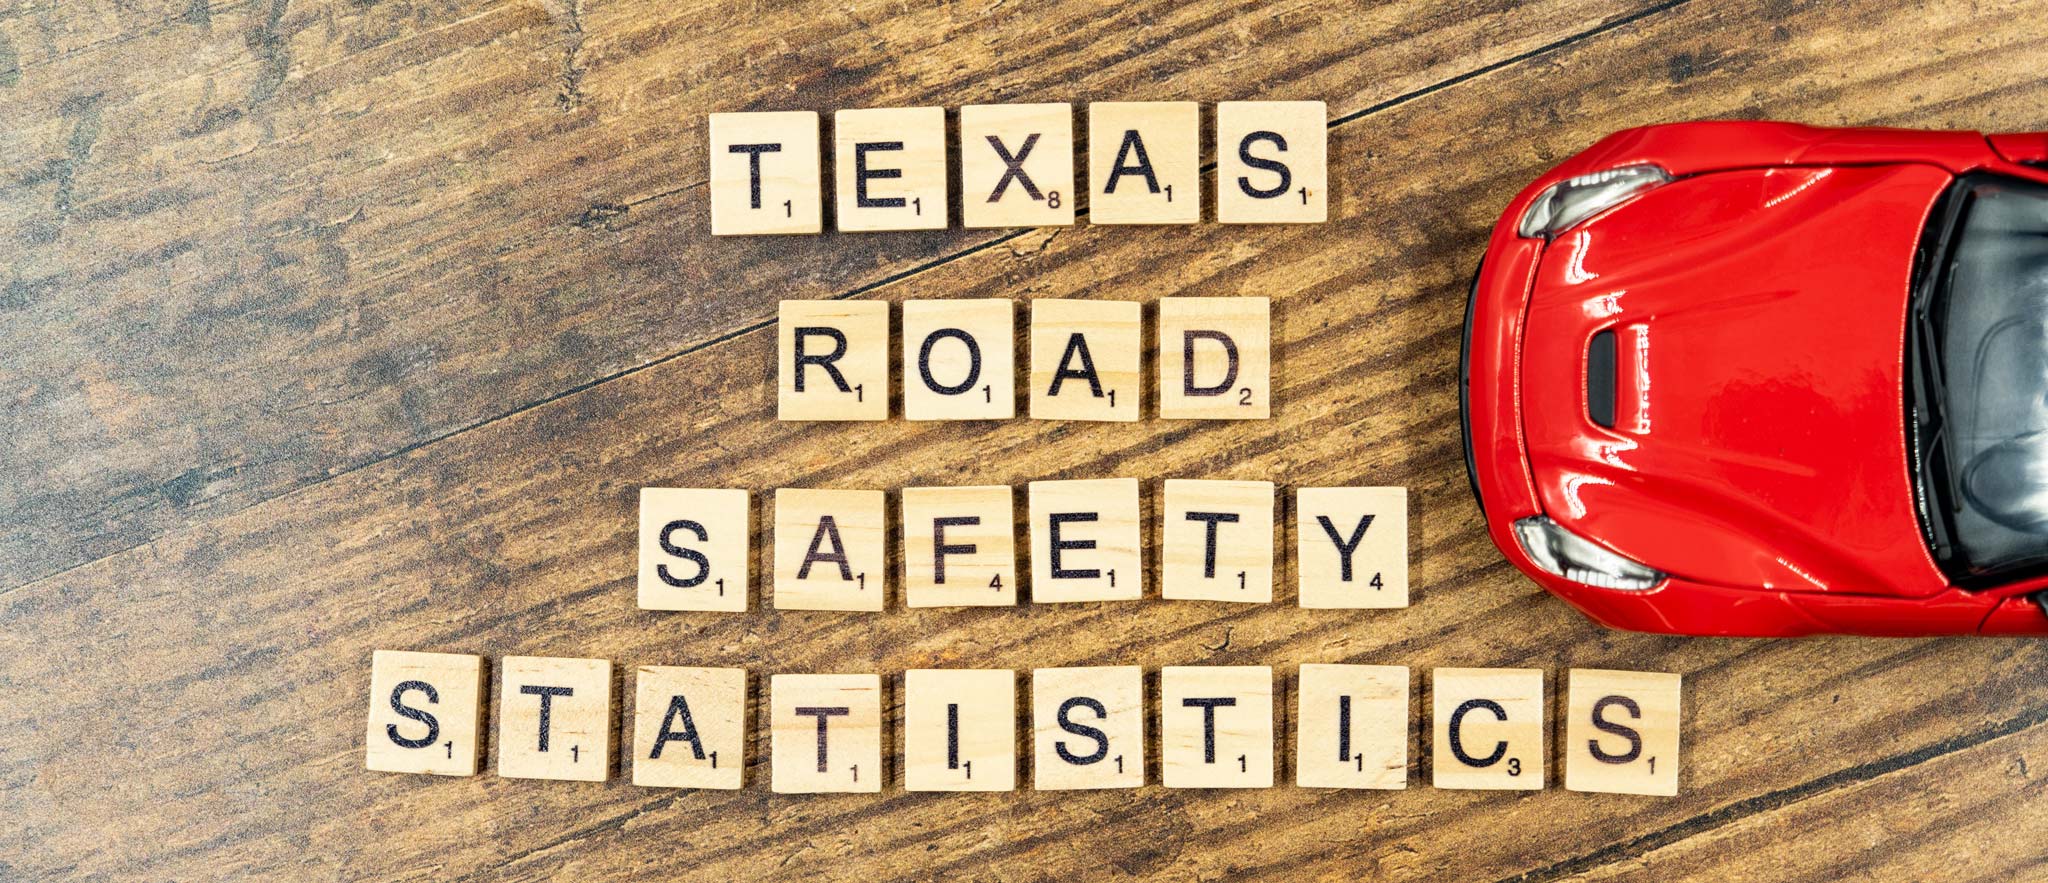 View our Texas road safety statistics